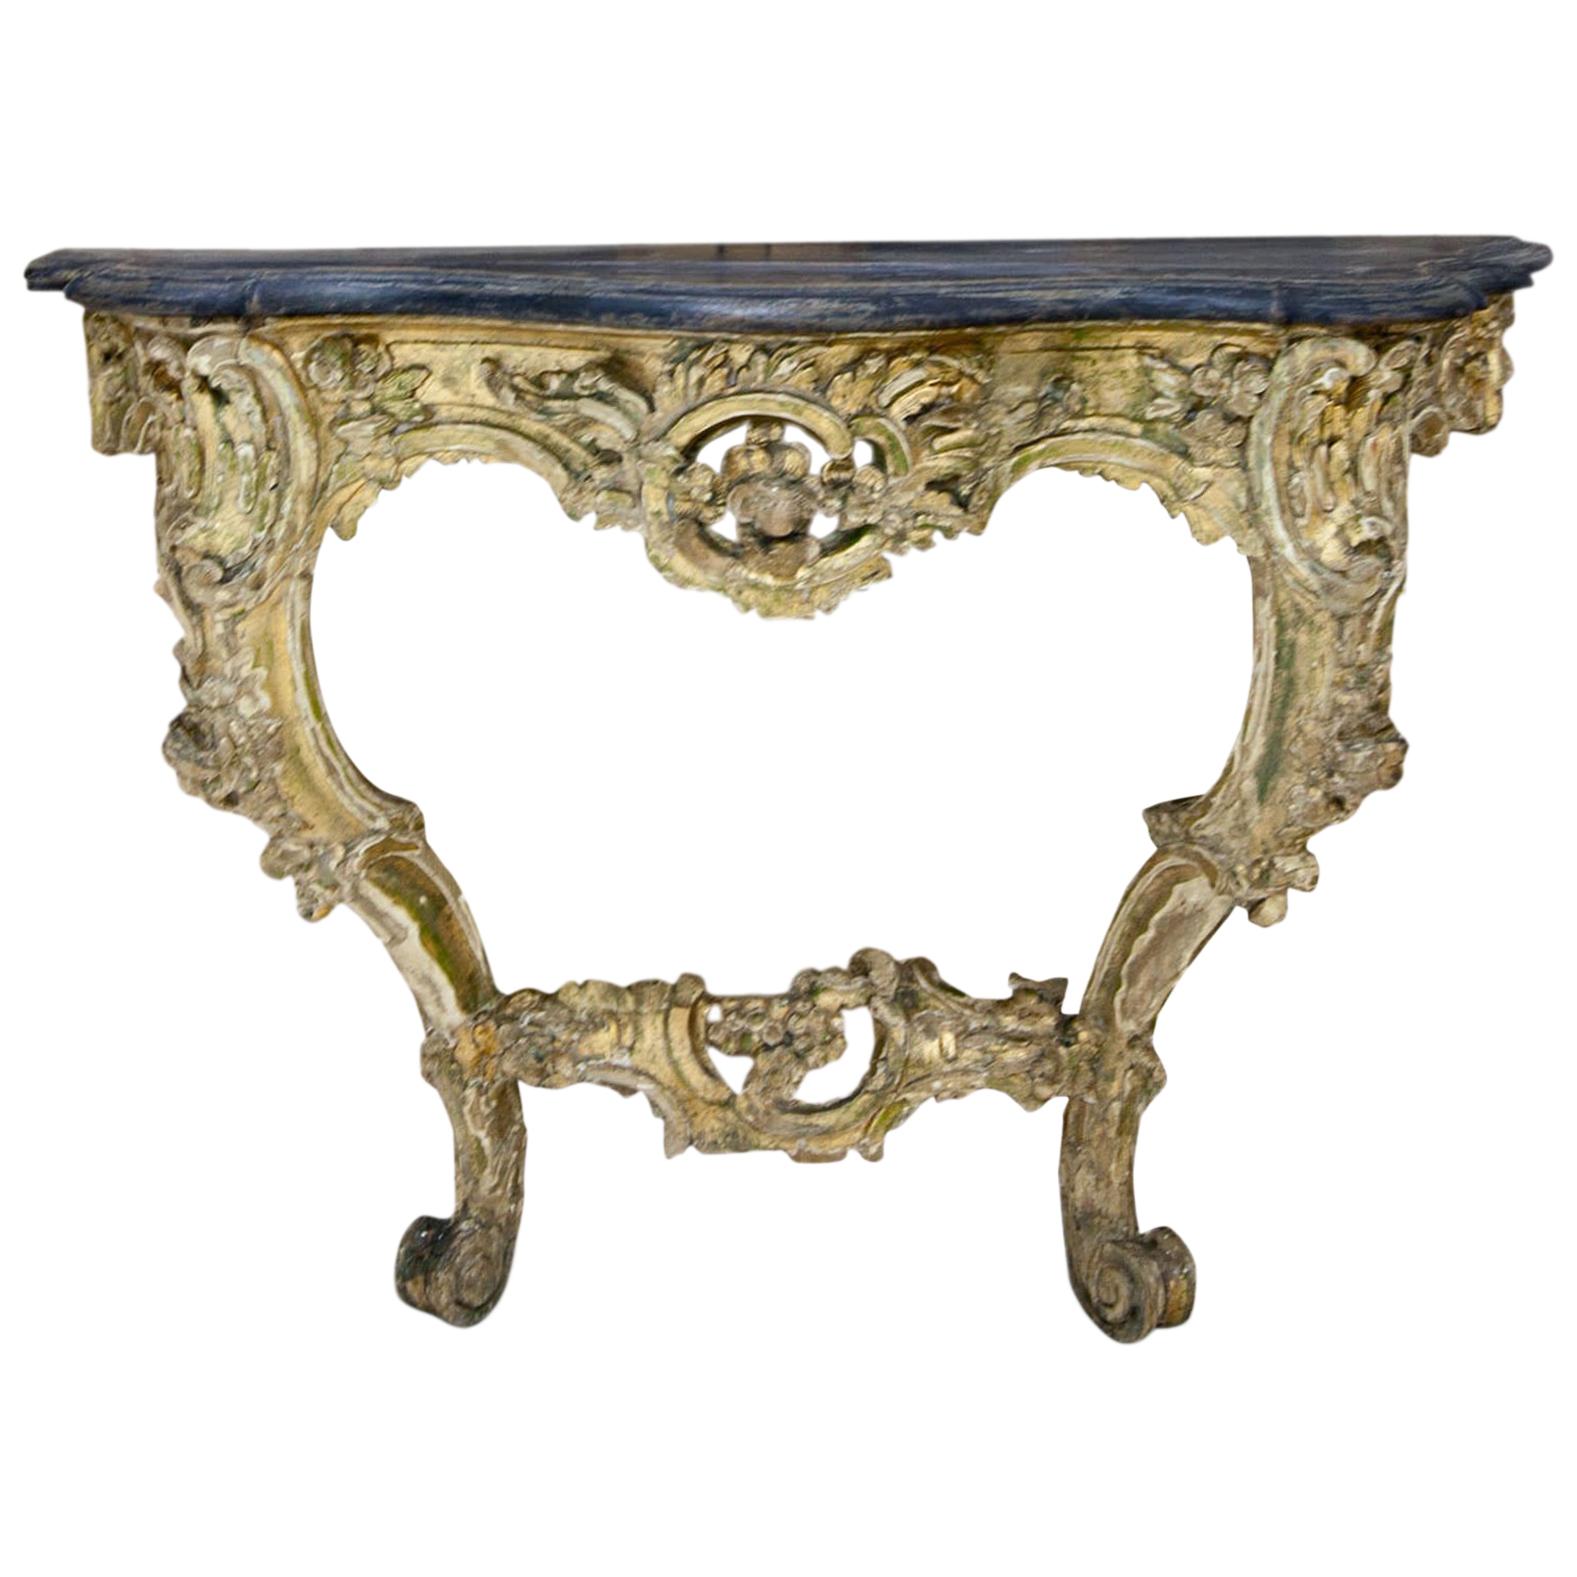 Rococo-Style Console Table, Mid-19th Century